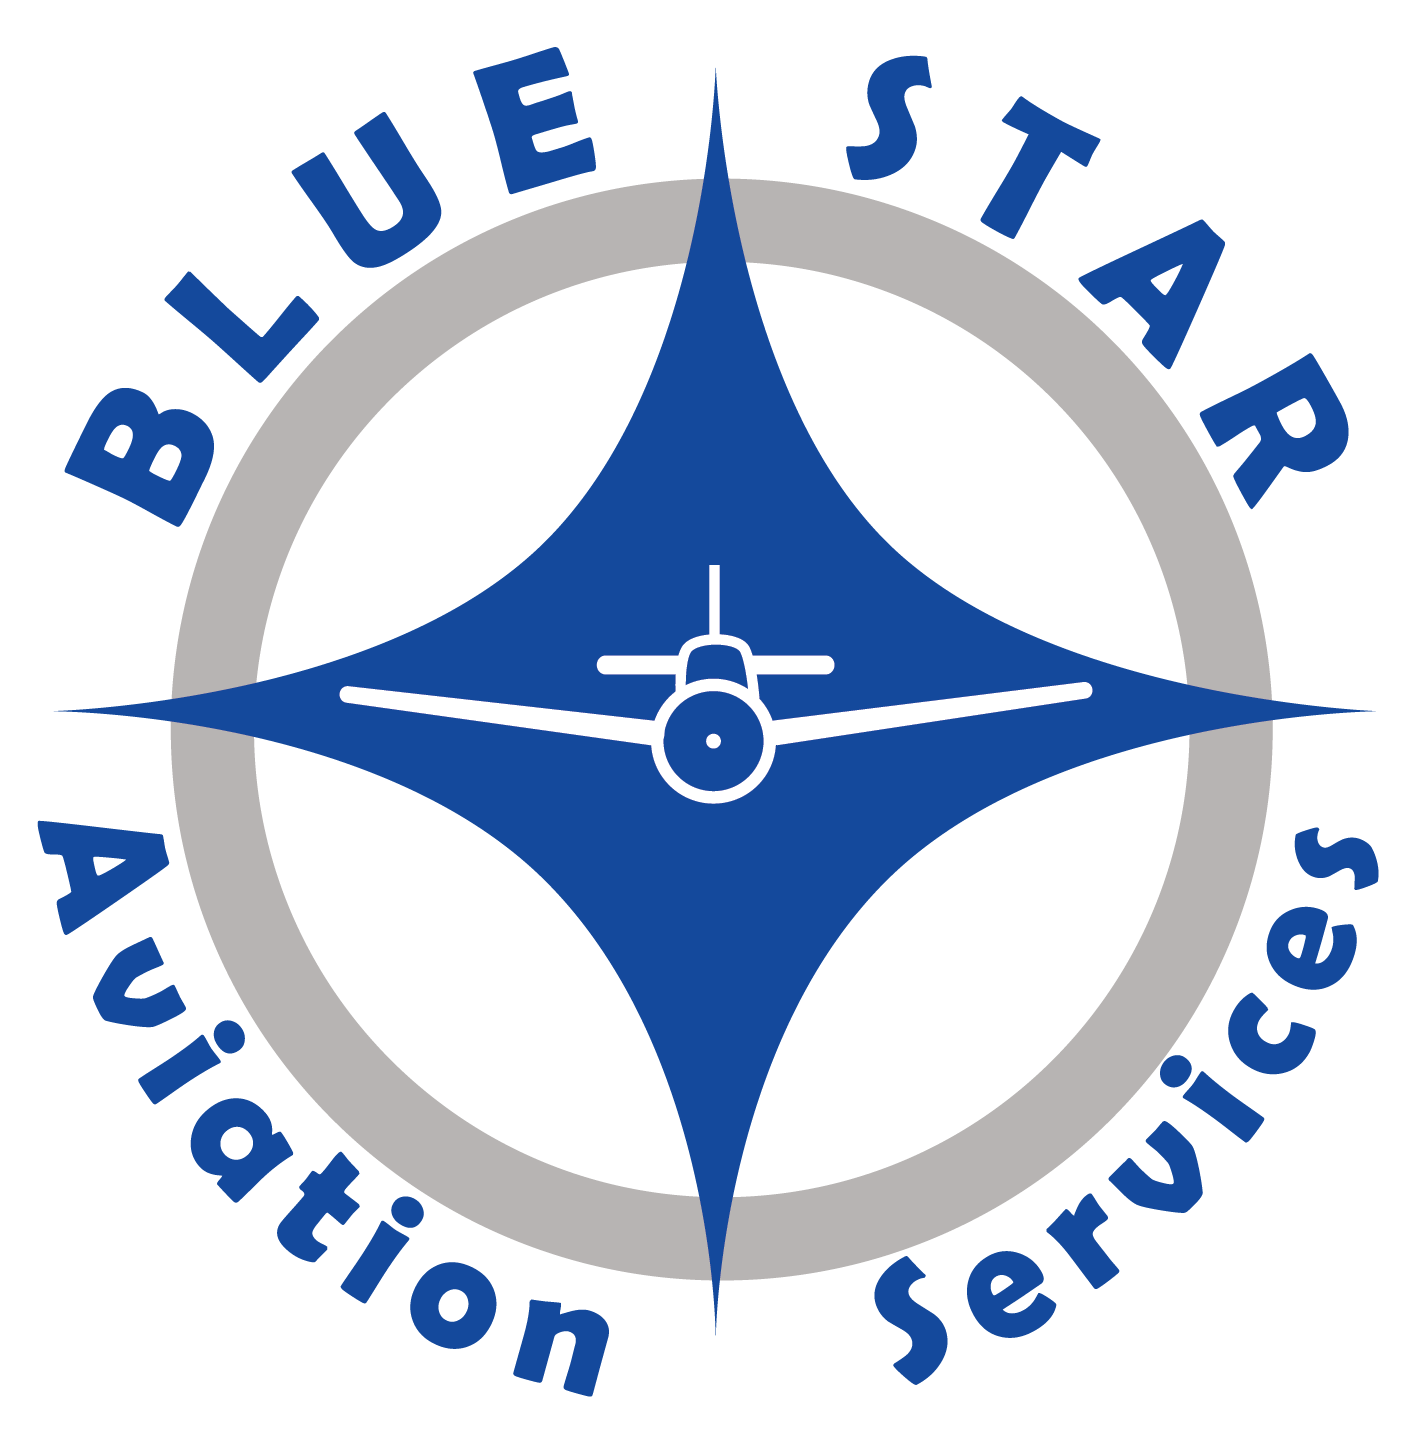 blue star logo with yellow